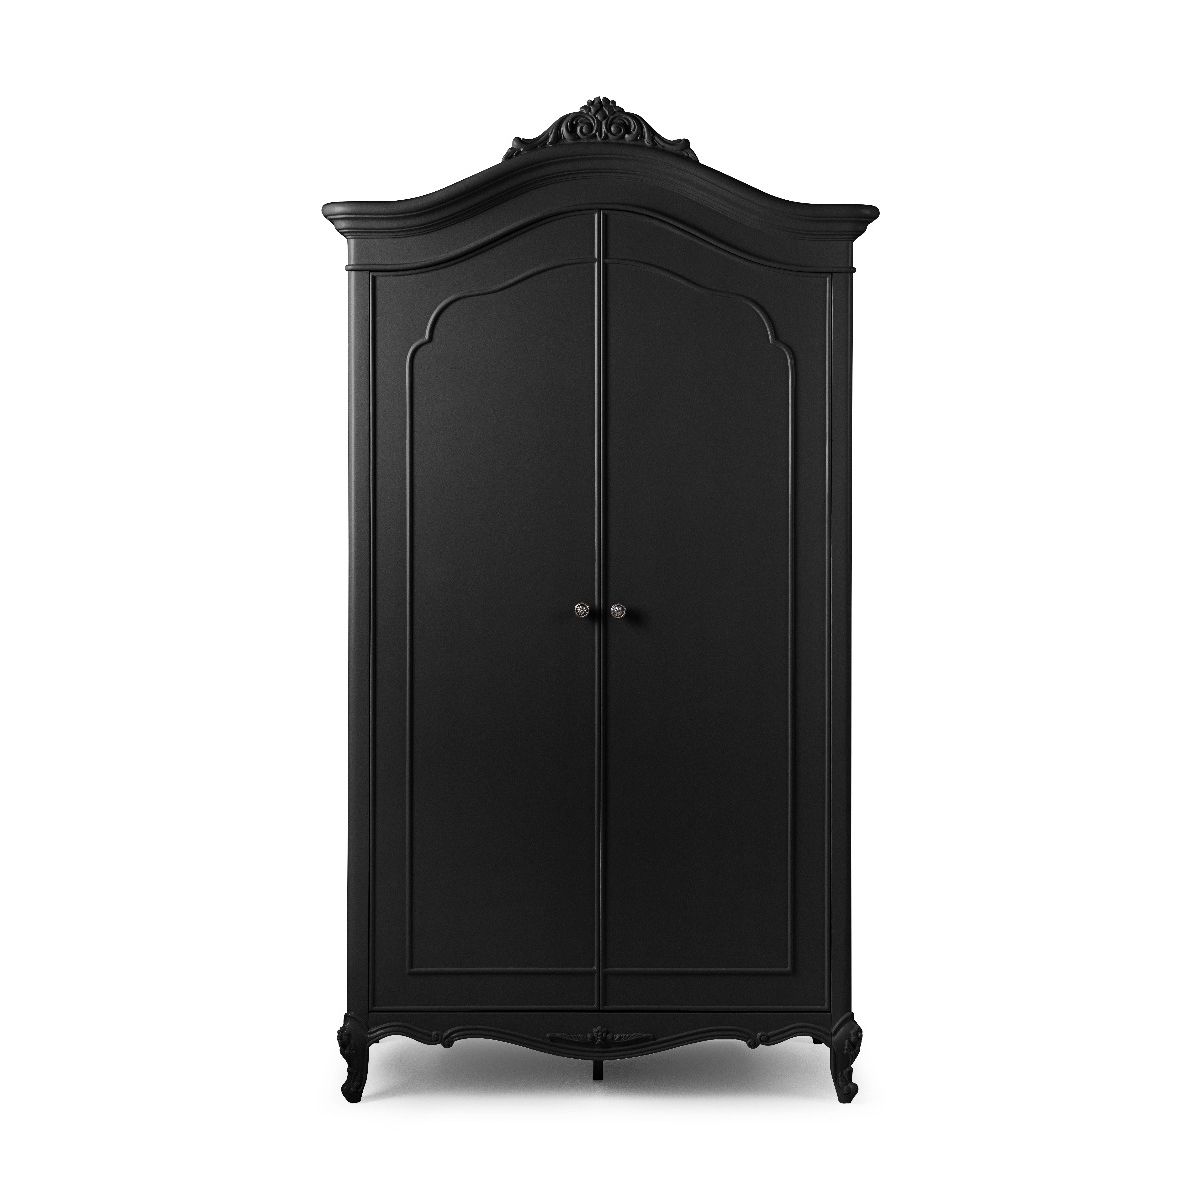 Rochelle Noir 2 Door French Armoire | French Bedroom Furniture – French  Style Wardrobes Throughout French Armoires And Wardrobes (View 12 of 15)